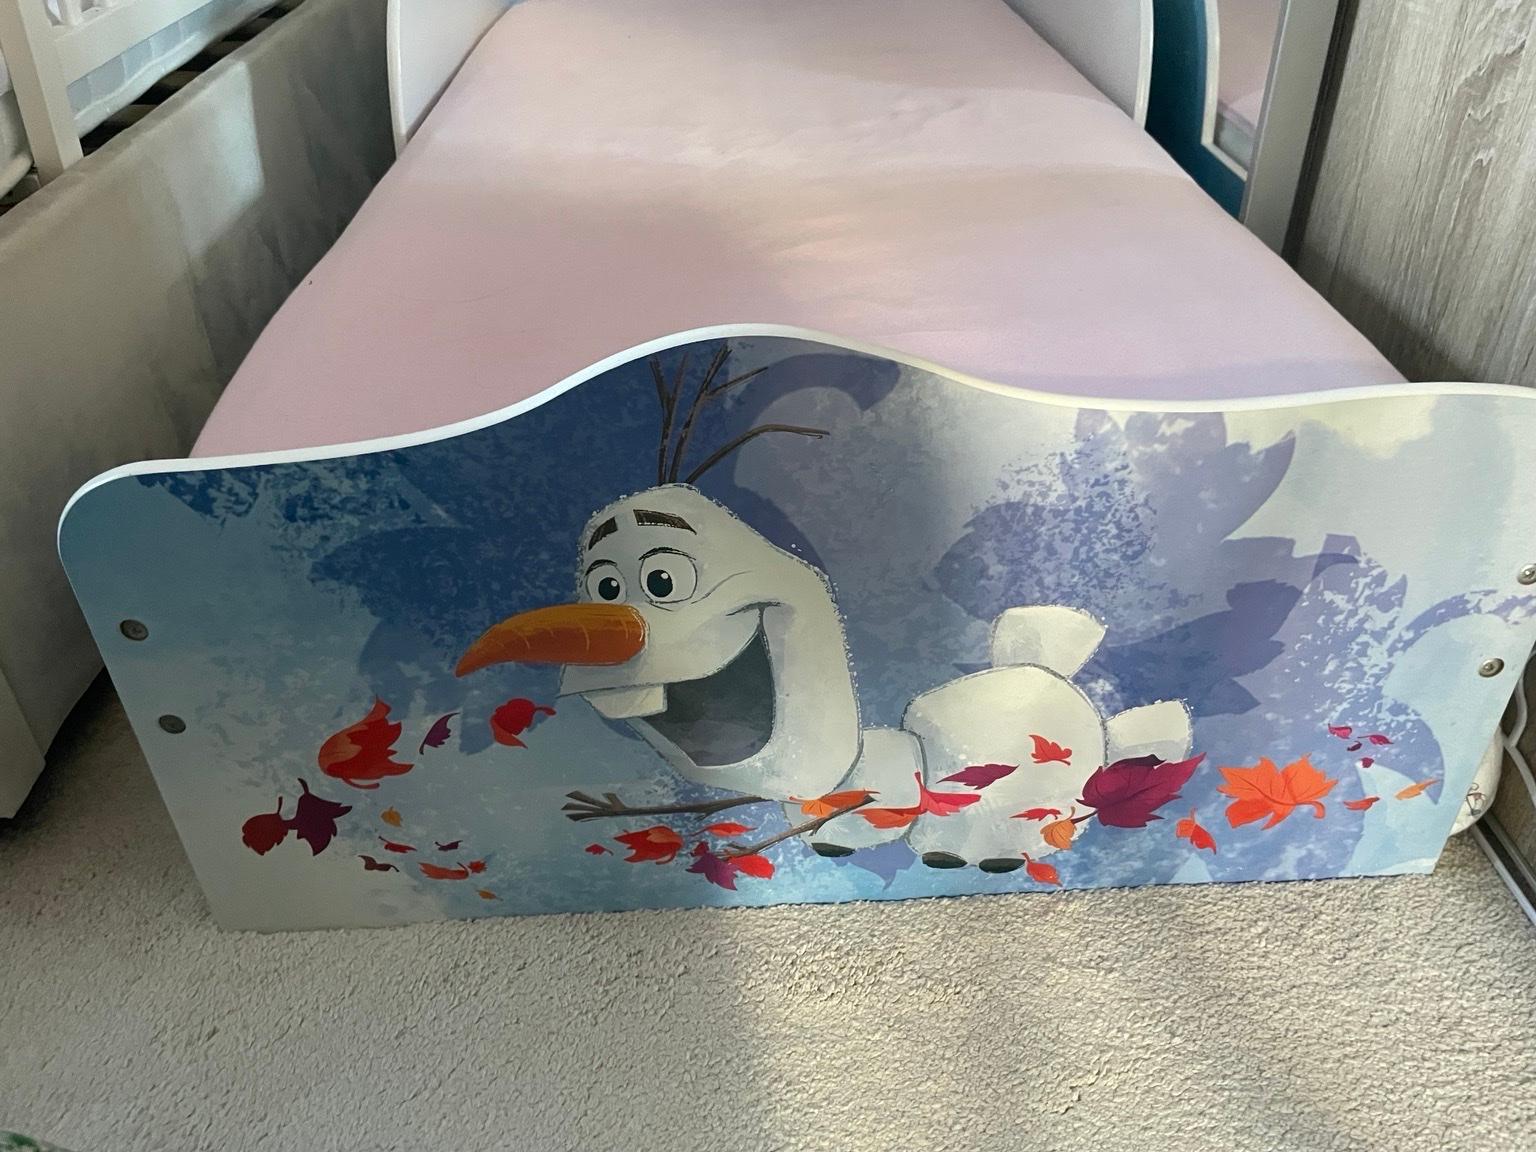 frozen toddler bed with mattress